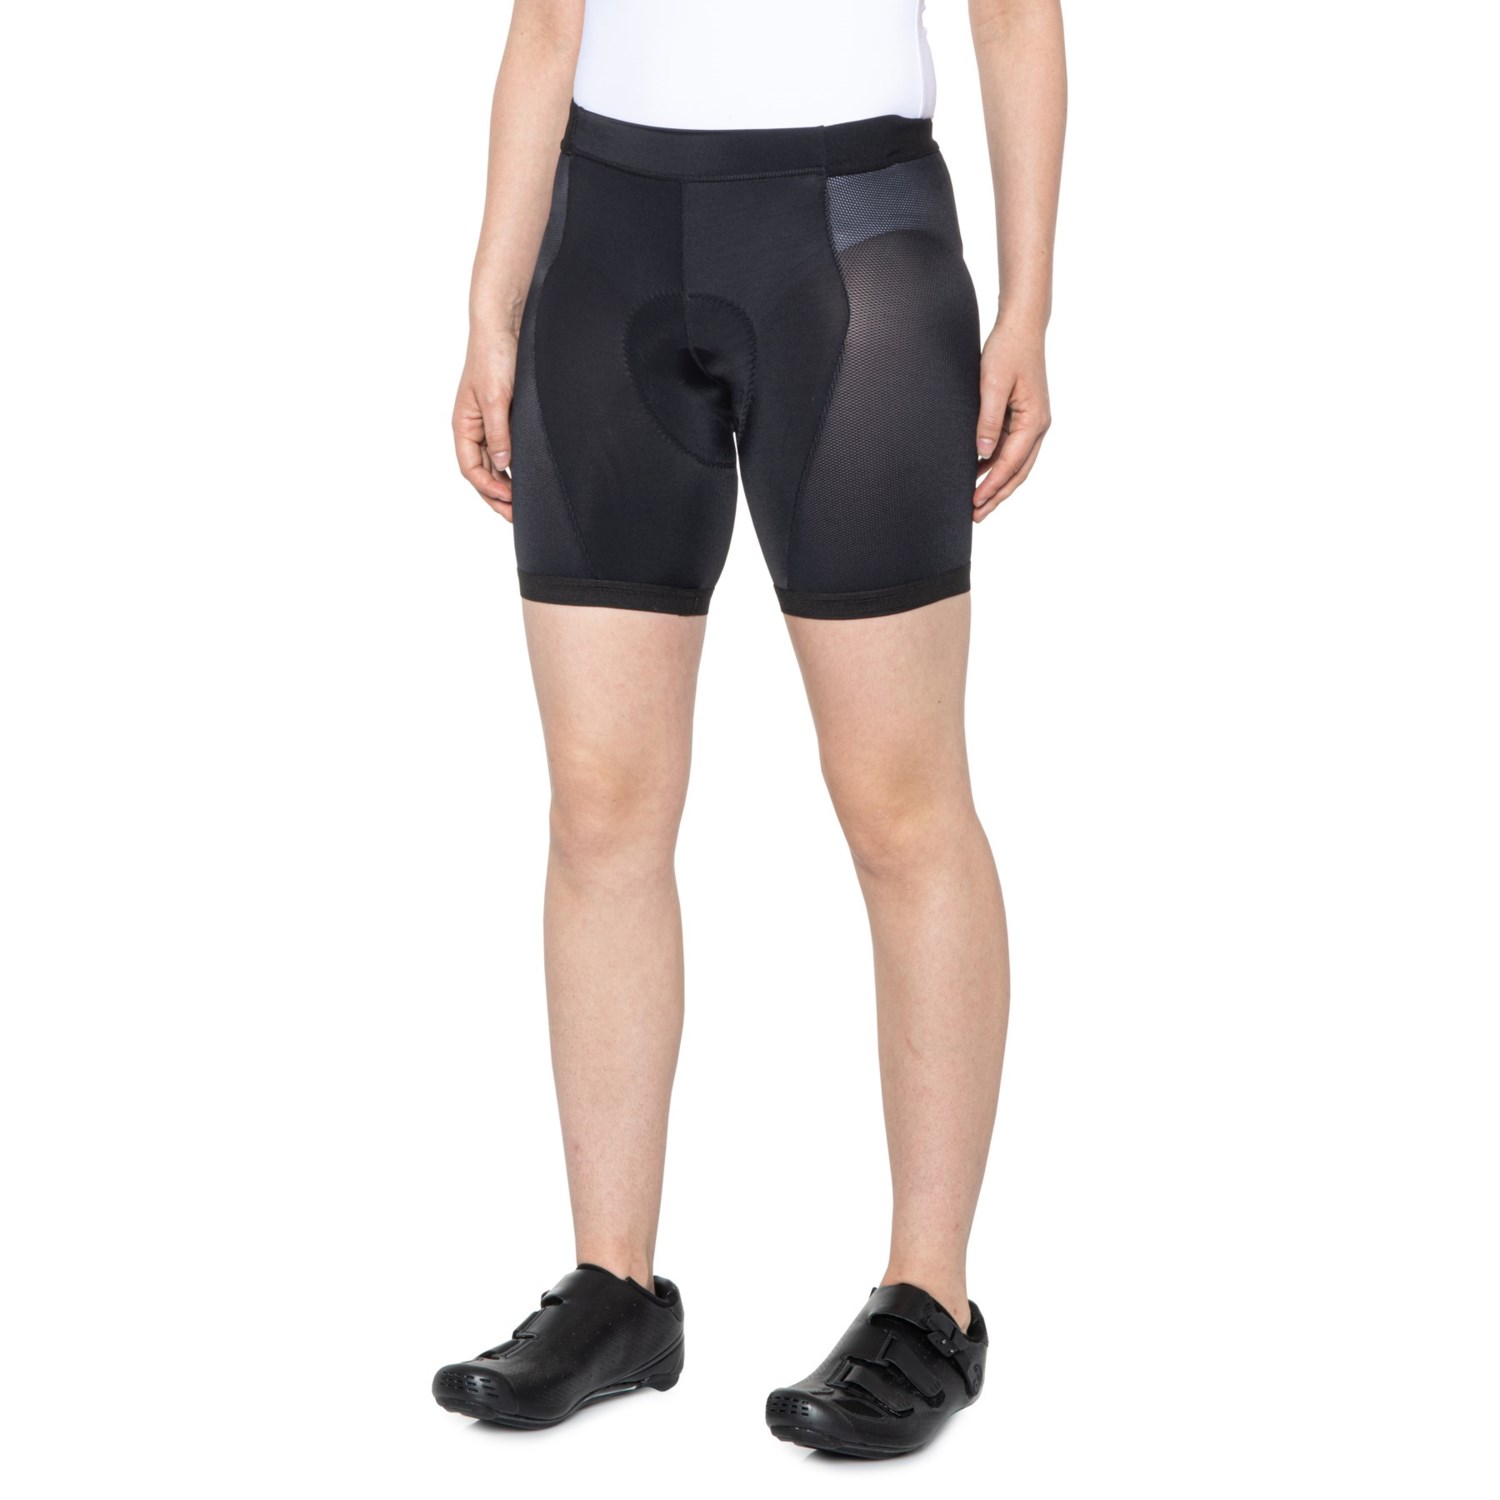 GORE WEAR C3 Liner Short Cycling Tights+ - Save 50%